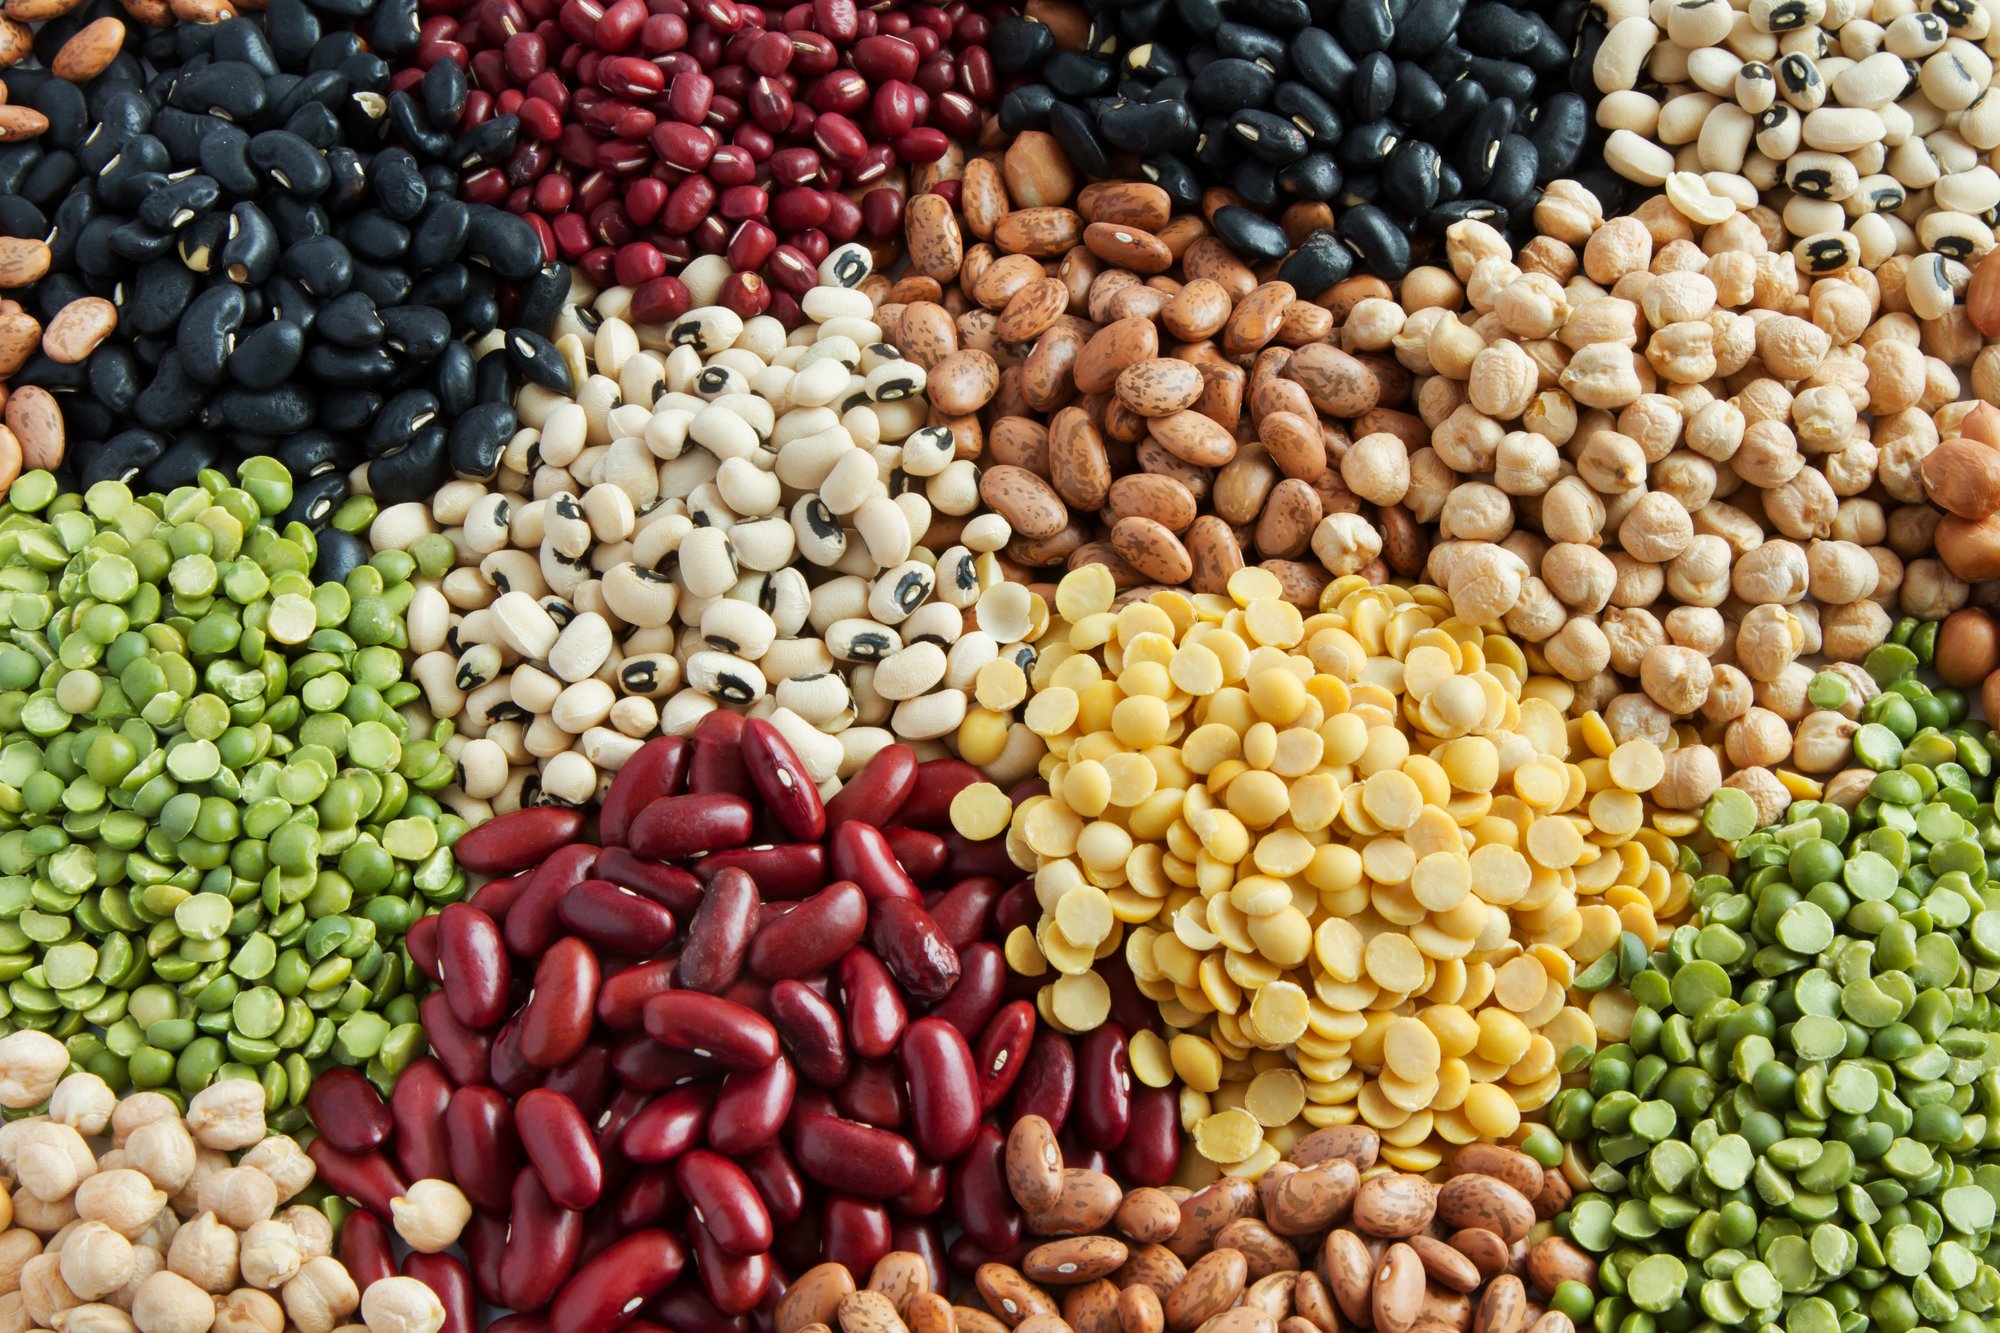 Are legumes good or bad for my dog?